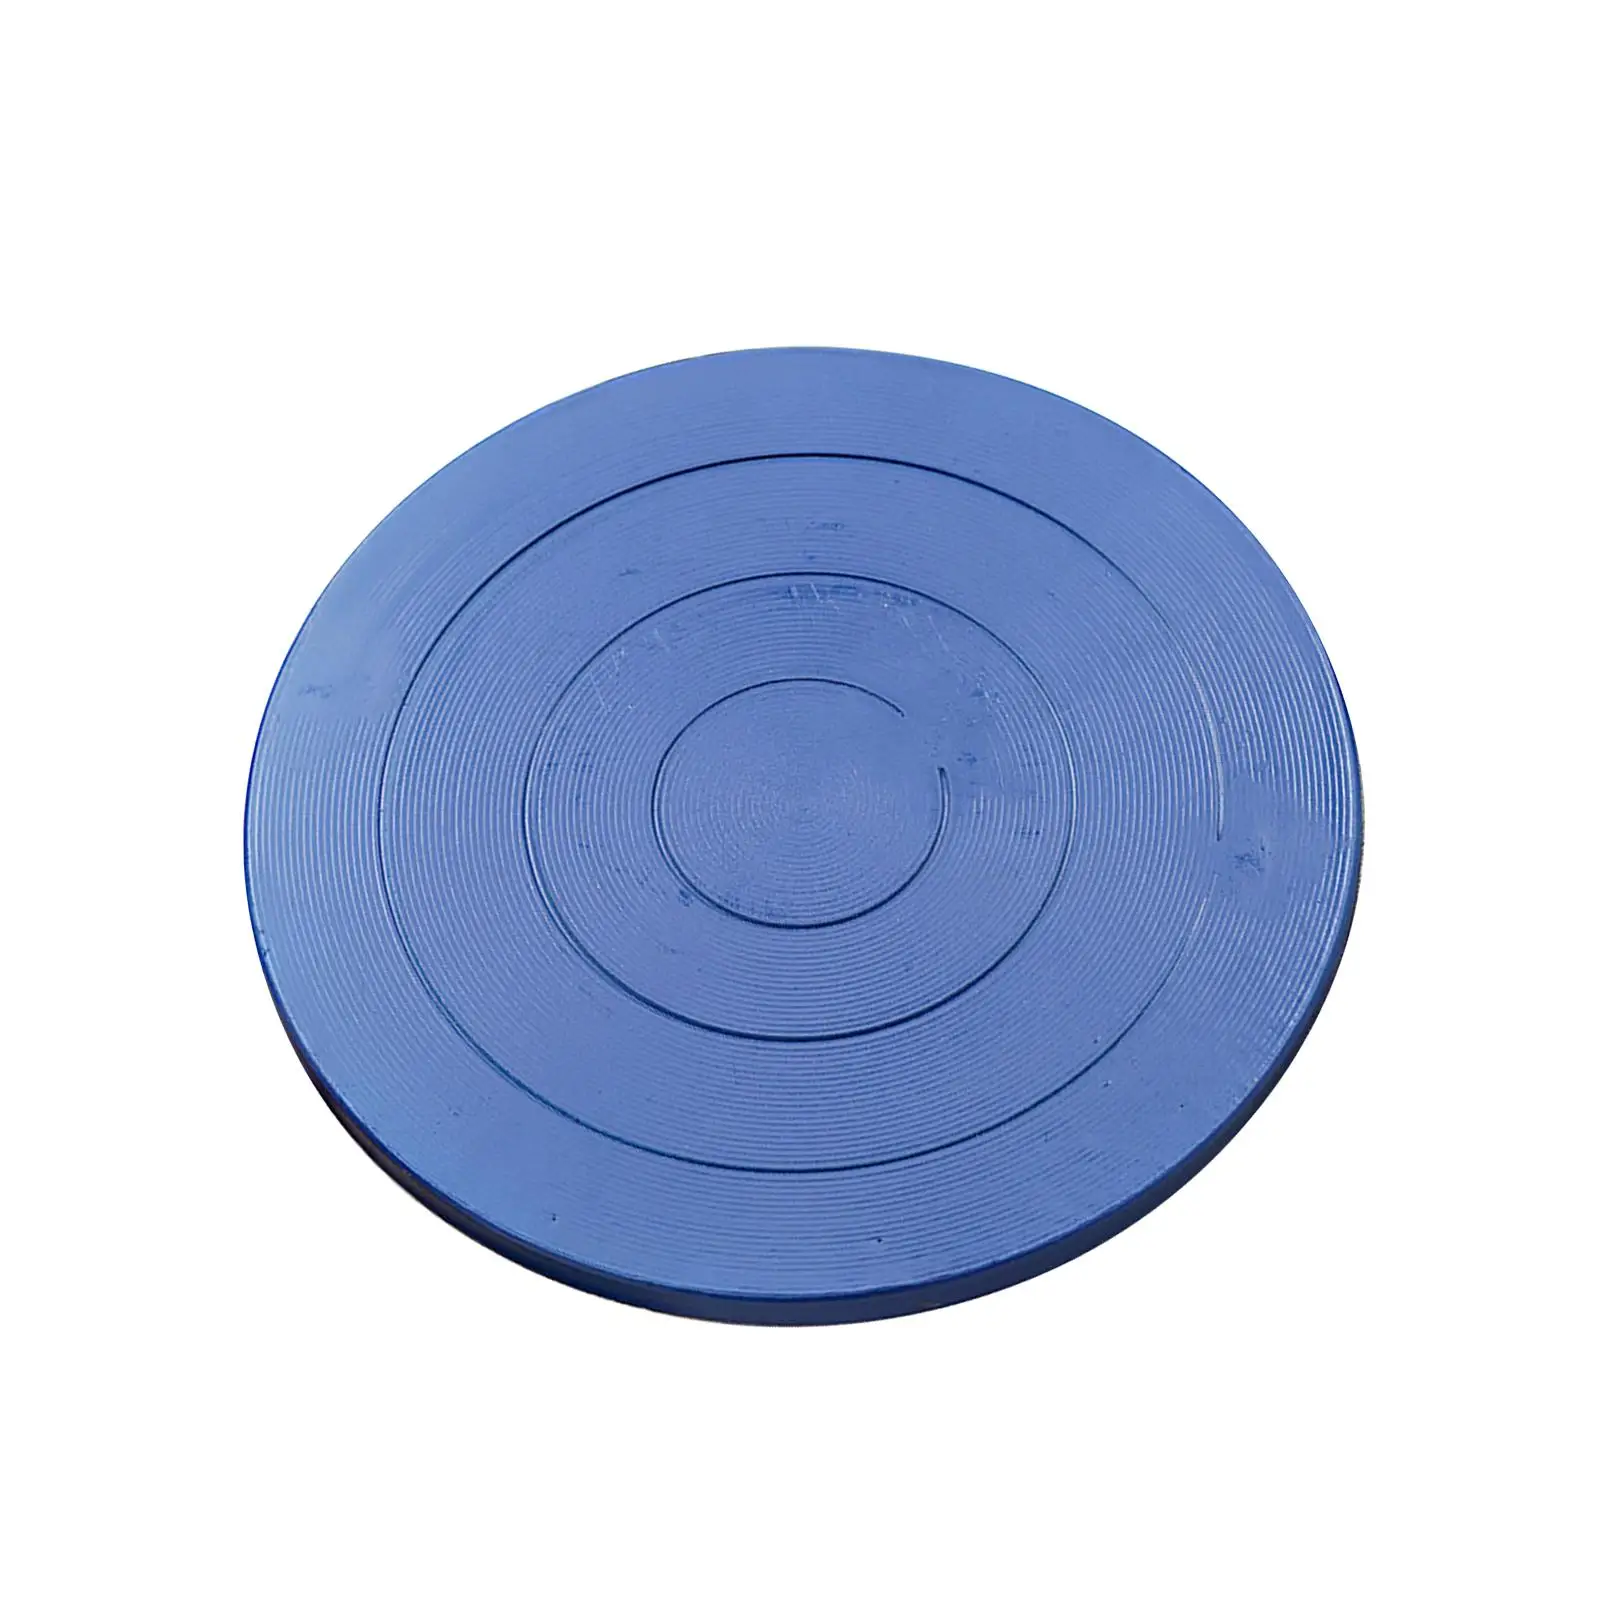 Pottery Turntable Wheel for Sculpting Pottery Banding Wheel Turn Plate Tools